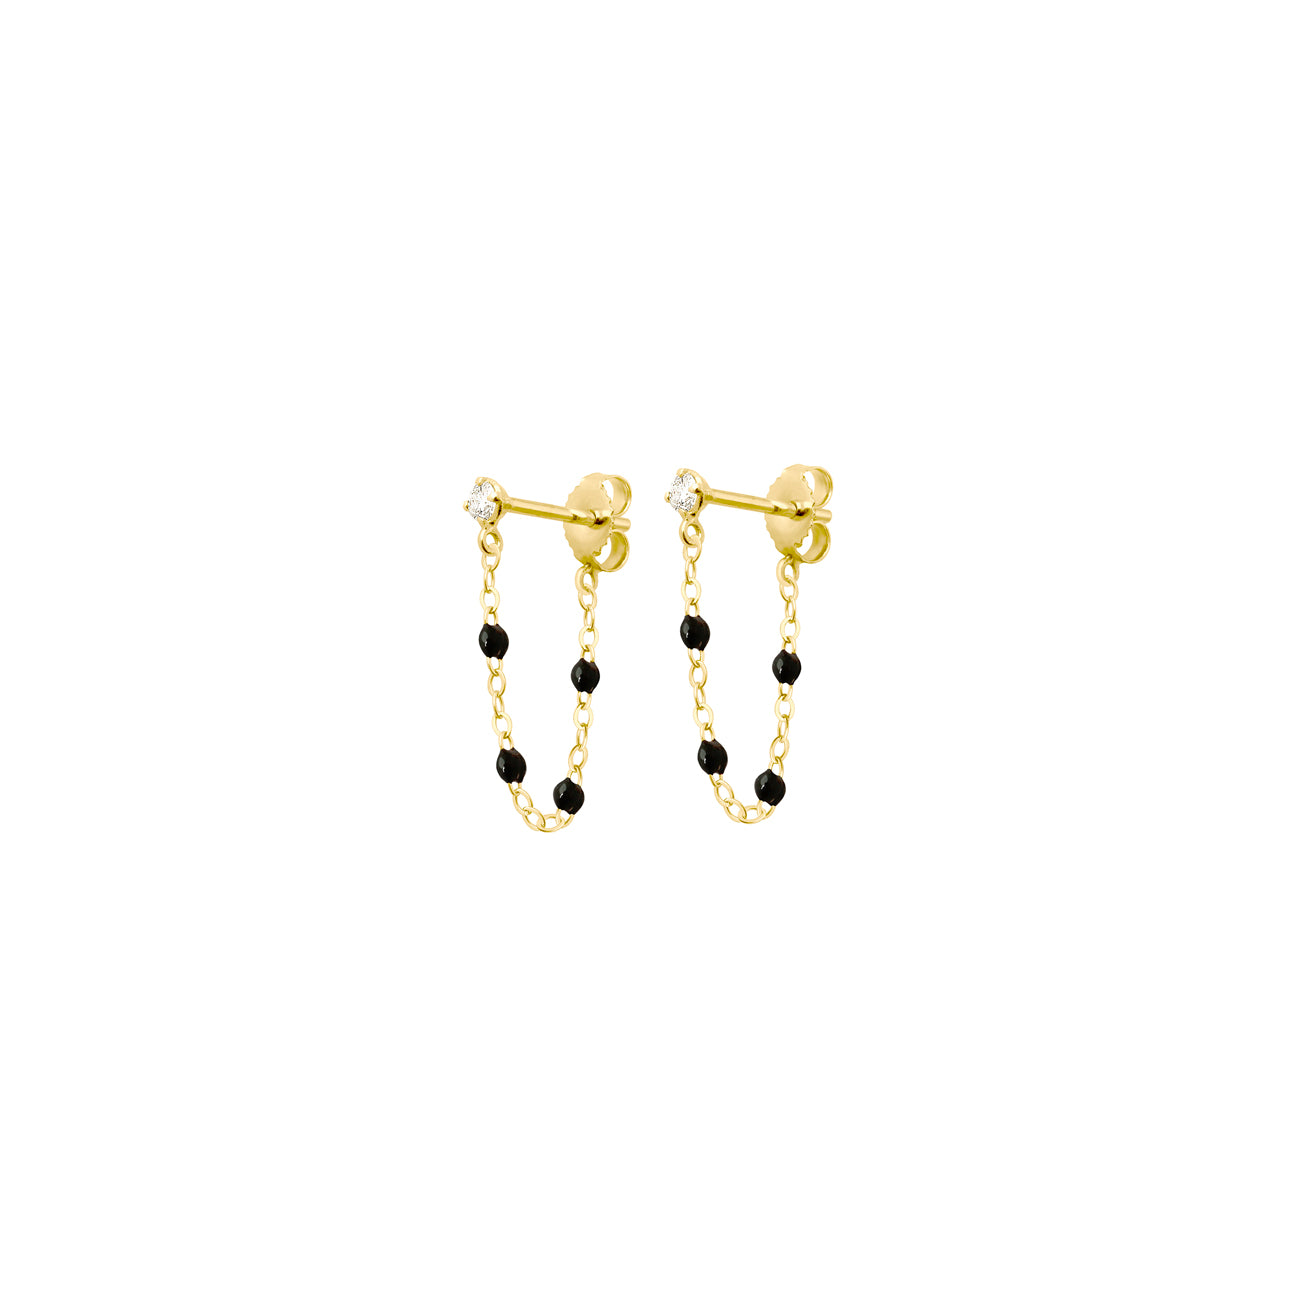 Gold black beads earrings designs with weight || gold earrings design  ideas|| latest gold jewellery | Latest gold jewellery, Gold earrings, Gold  earrings designs